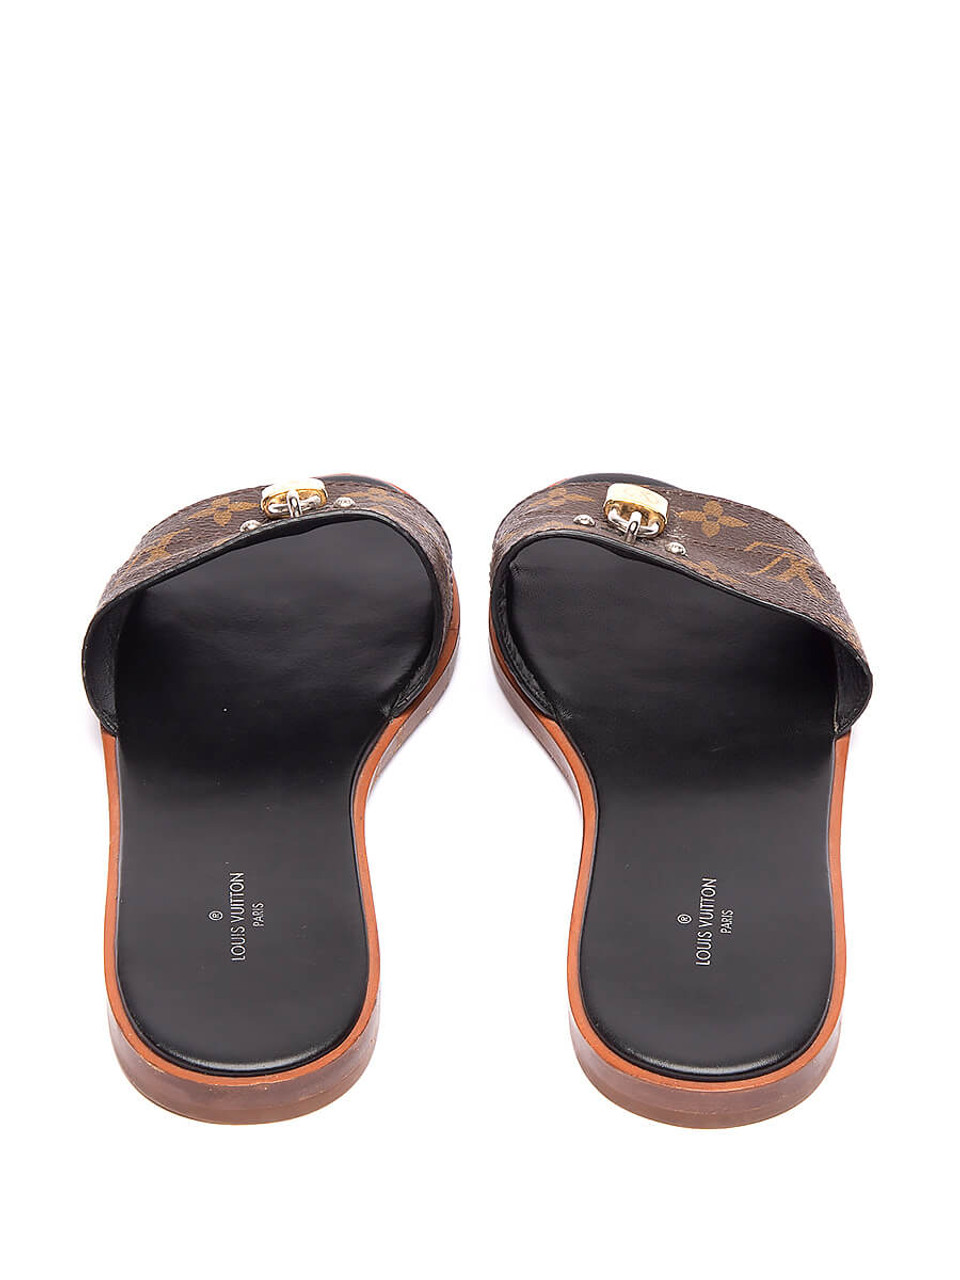 Louis Vuitton - Authenticated Lock It Sandal - Leather Brown for Women, Very Good Condition